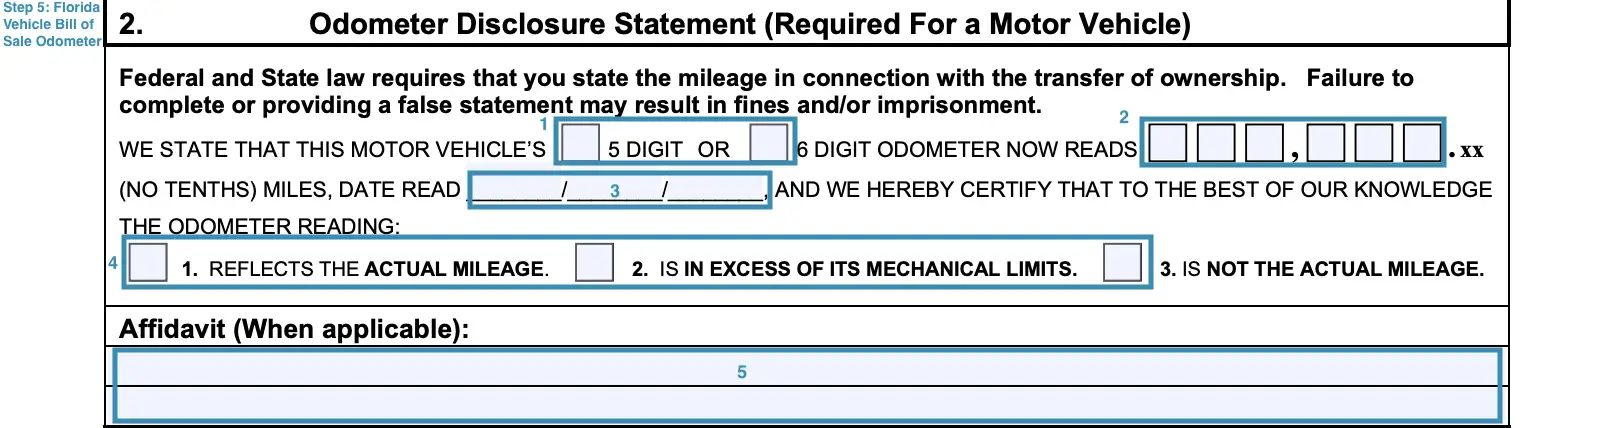 Section for filling out the odometer disclosure of Florida bill of sale template for motor vehicle